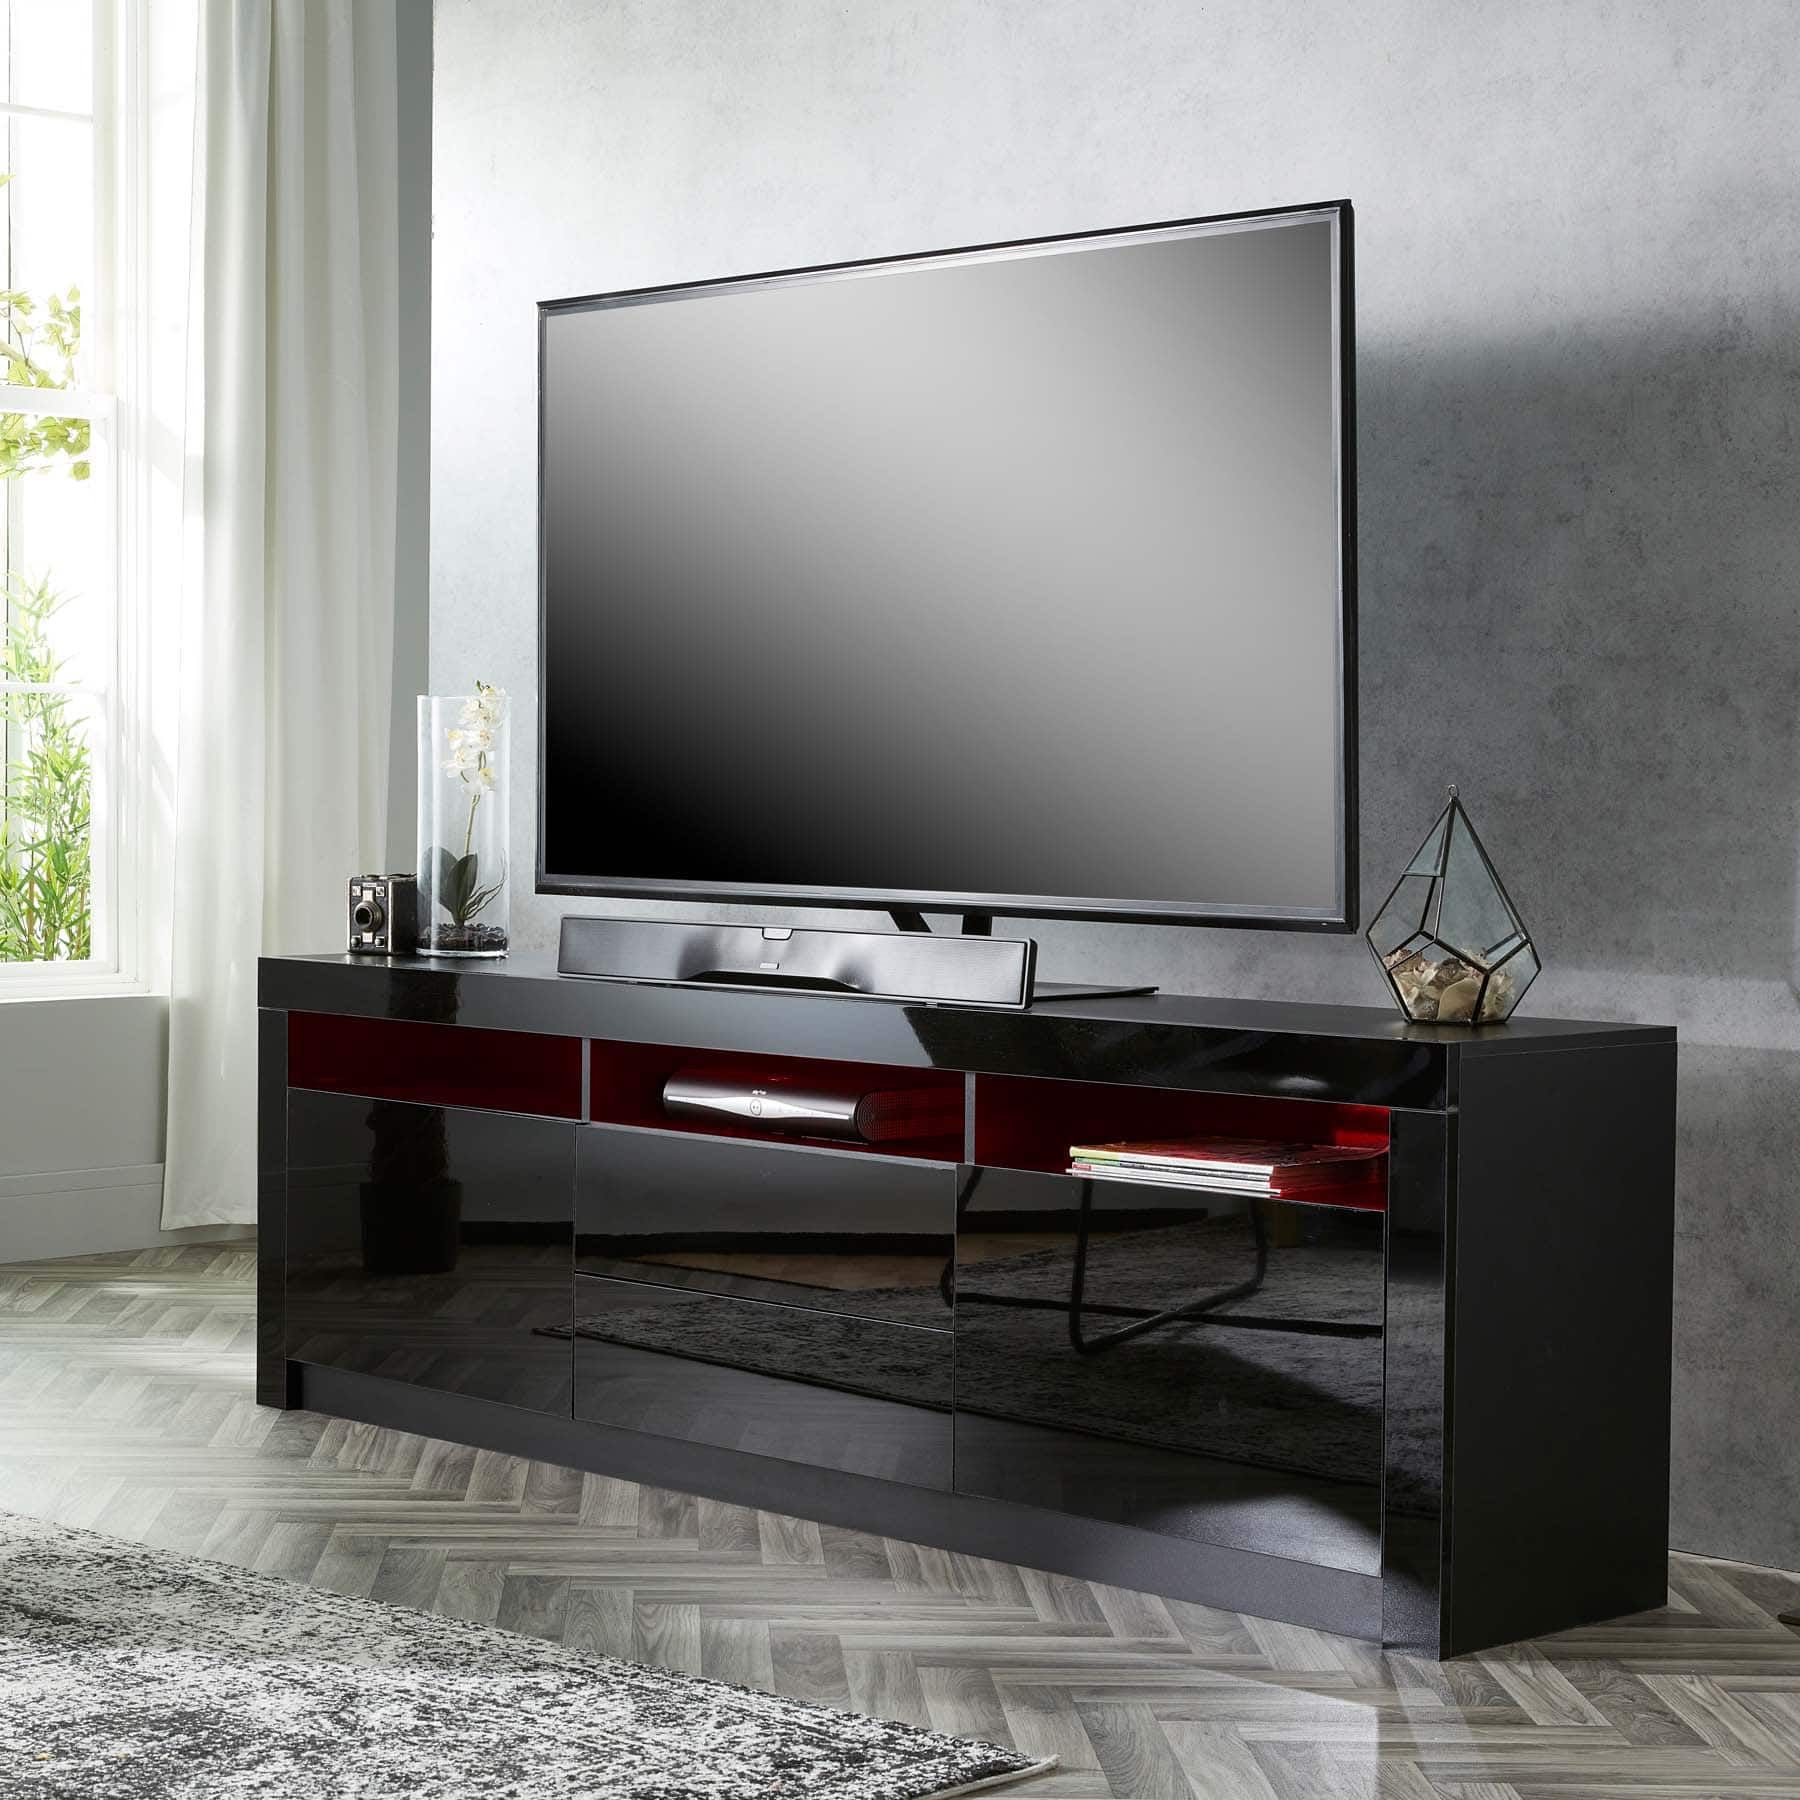 Black Tv Cabinet With Drawers & Rgb Lights For Up To 85″ Screens Within Rgb Entertainment Centers Black (View 15 of 15)